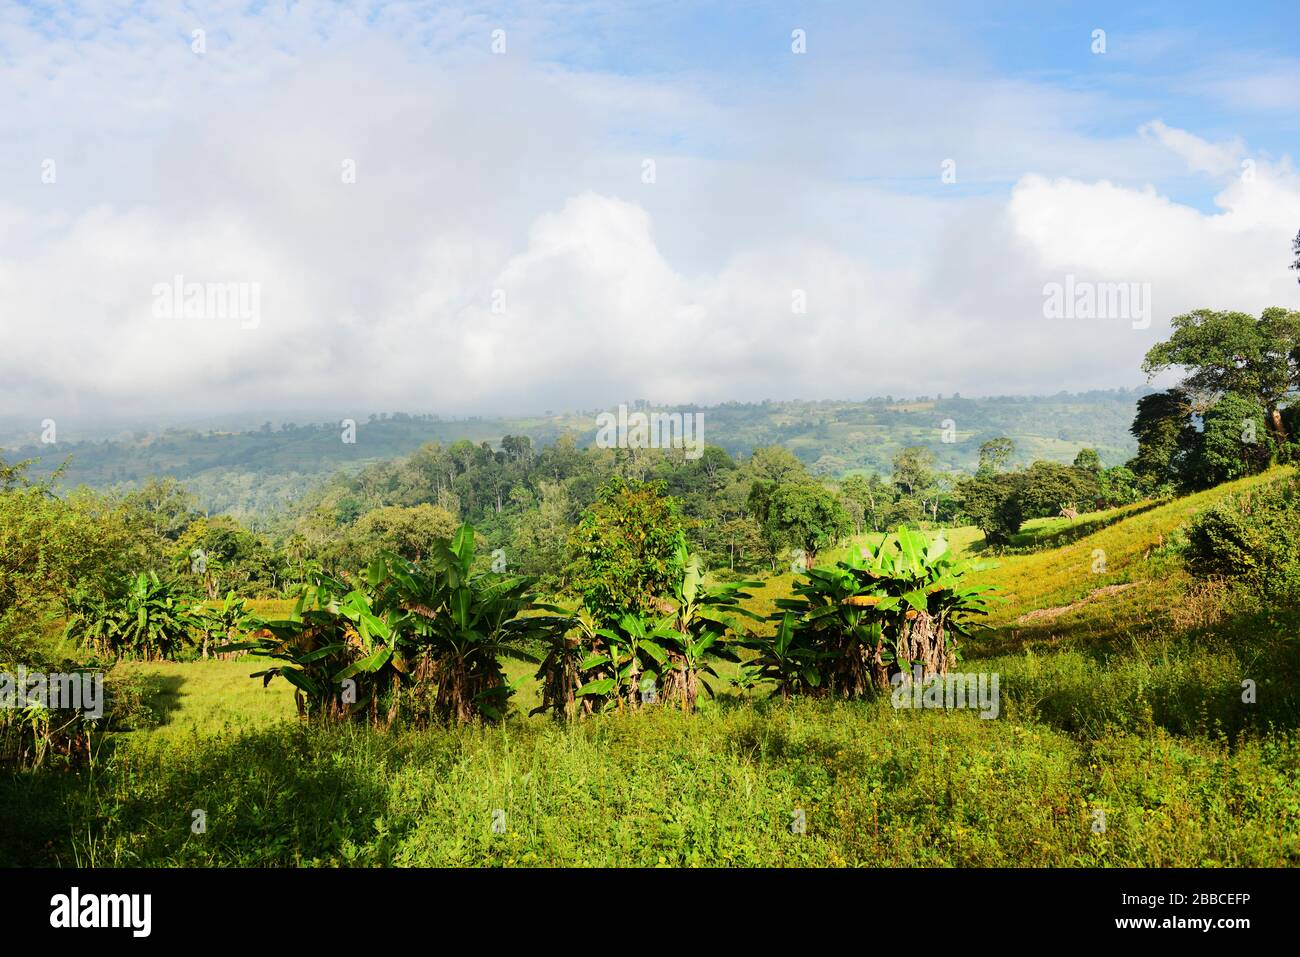 Agruculture landscapes in Ethiopia's Southwest. Stock Photo